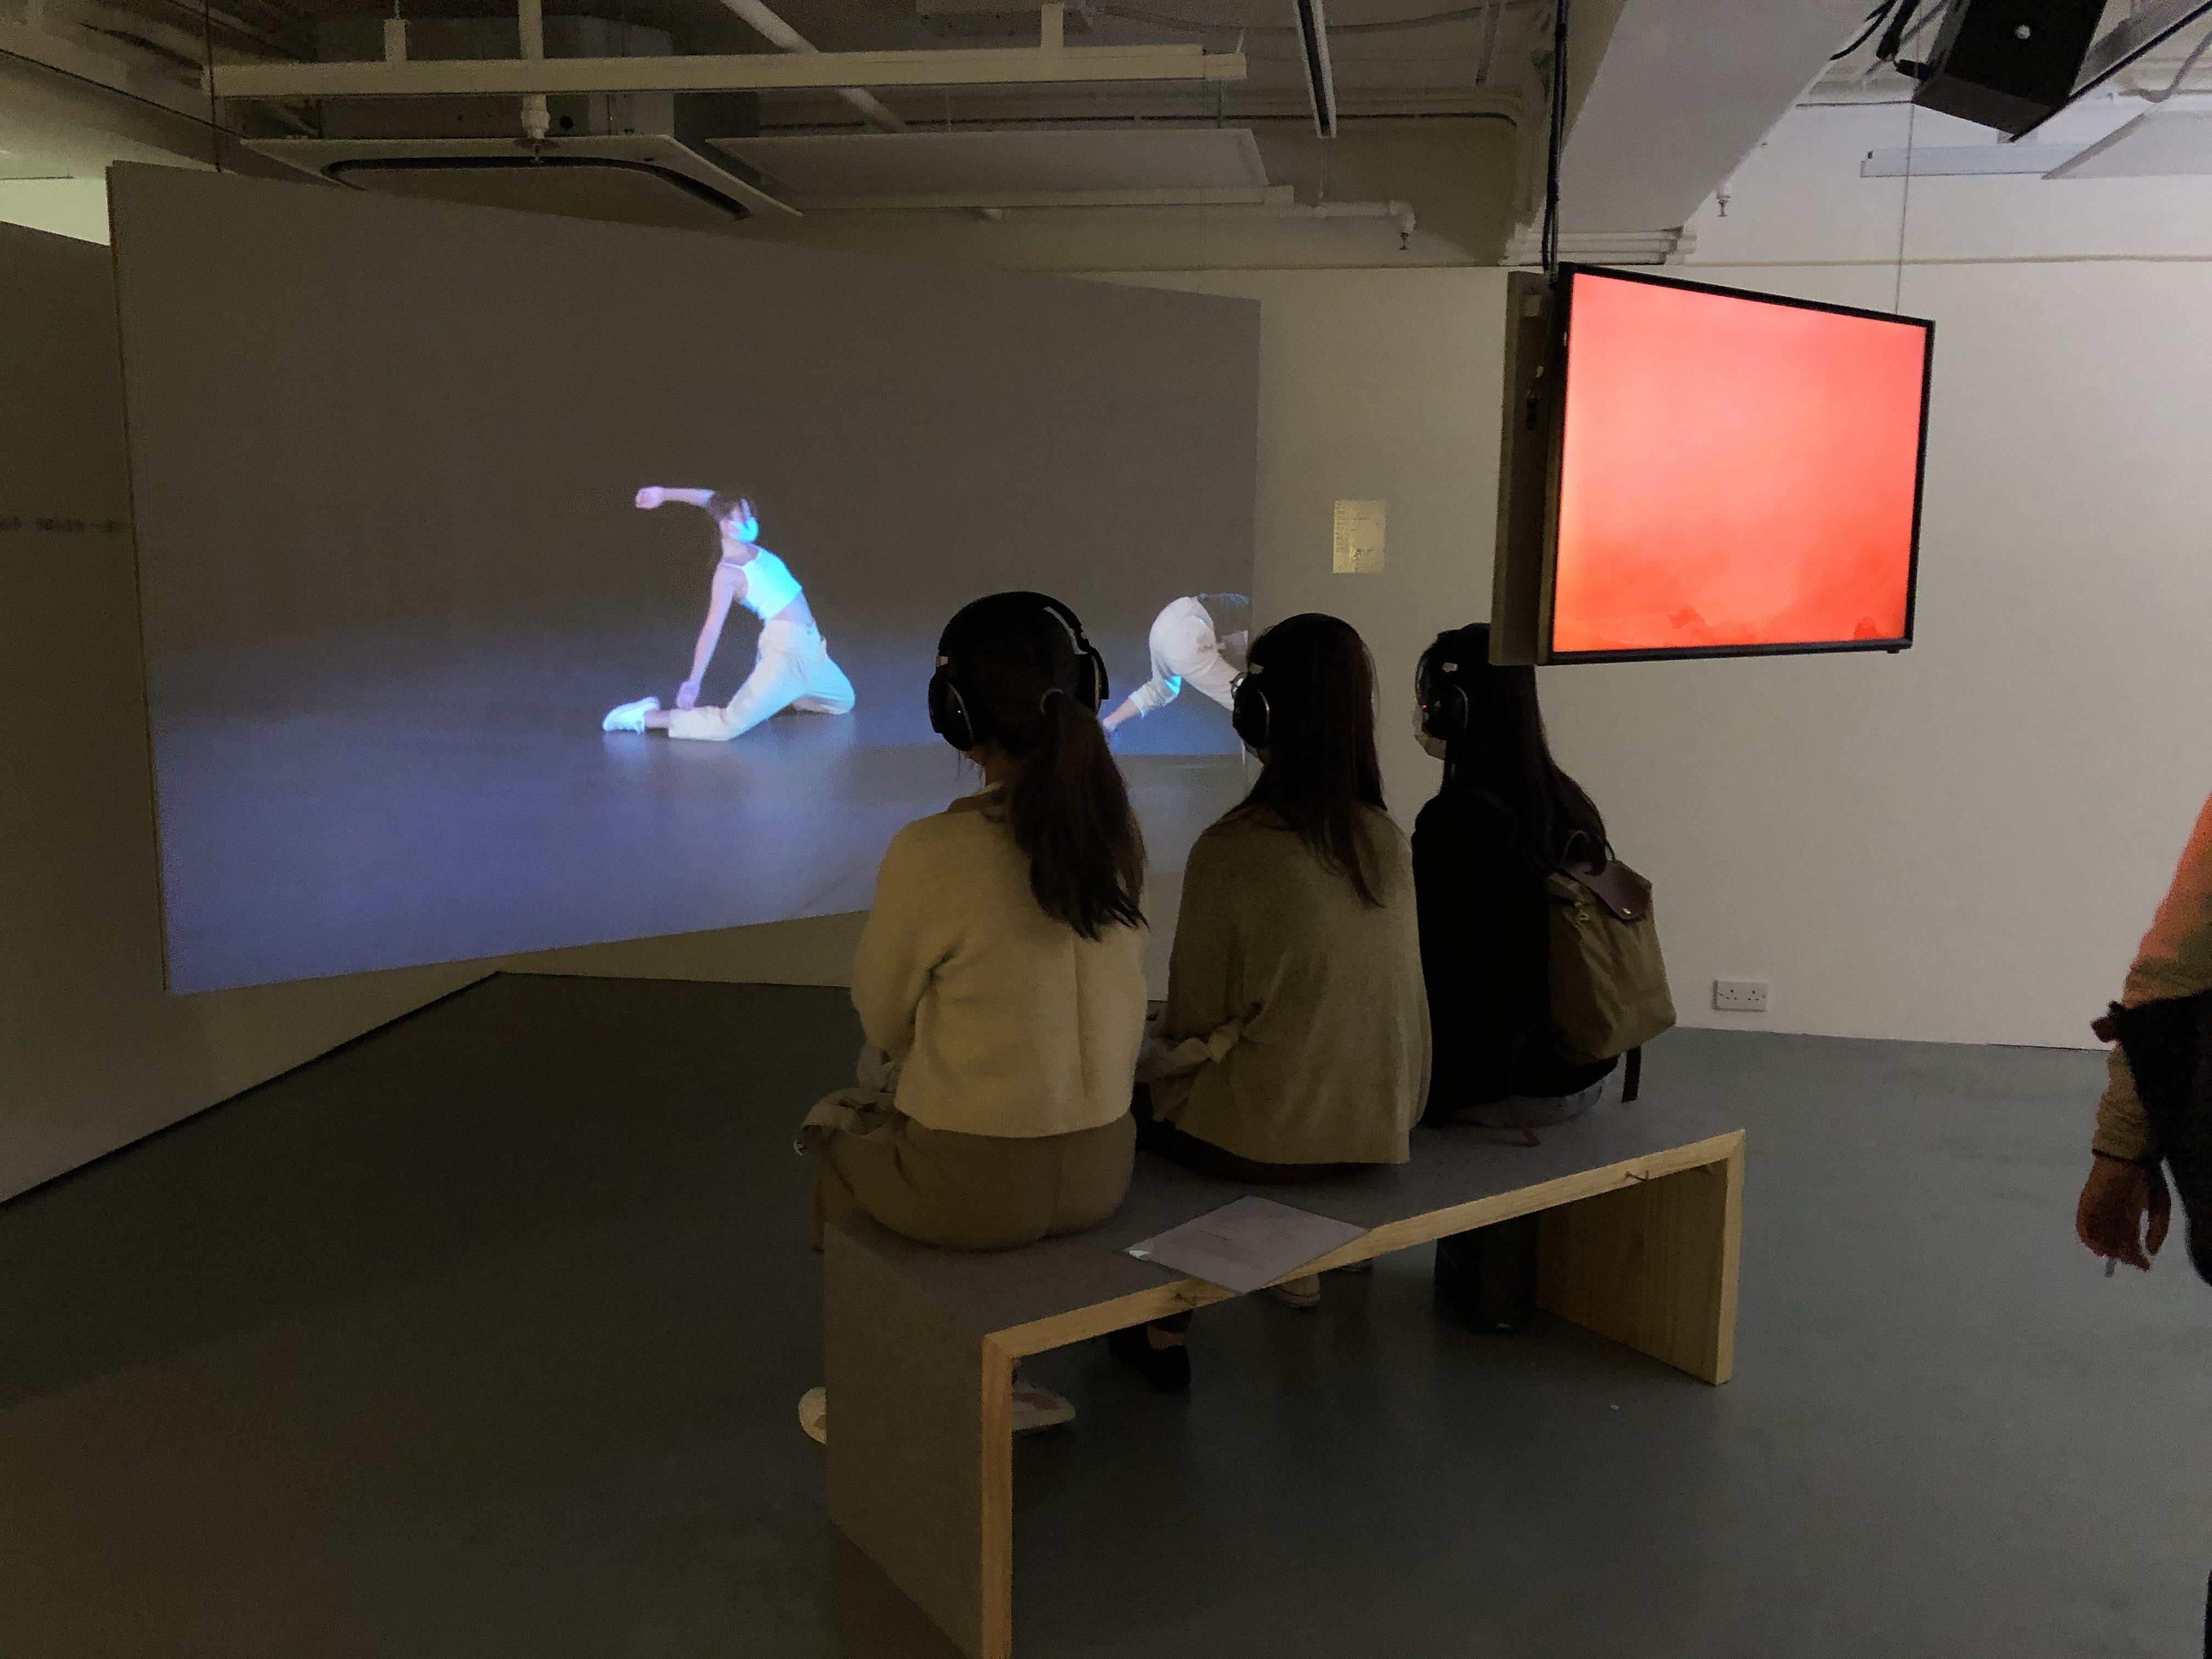 Yim Sui-fong’s Avatar (2021), Hong Kong, March 10, 2021 at WMA Space exhibition called “Can’t touch this!”. 10MAR21&#xA;&#xA;&#xA;CREDIT: ENID TSUI